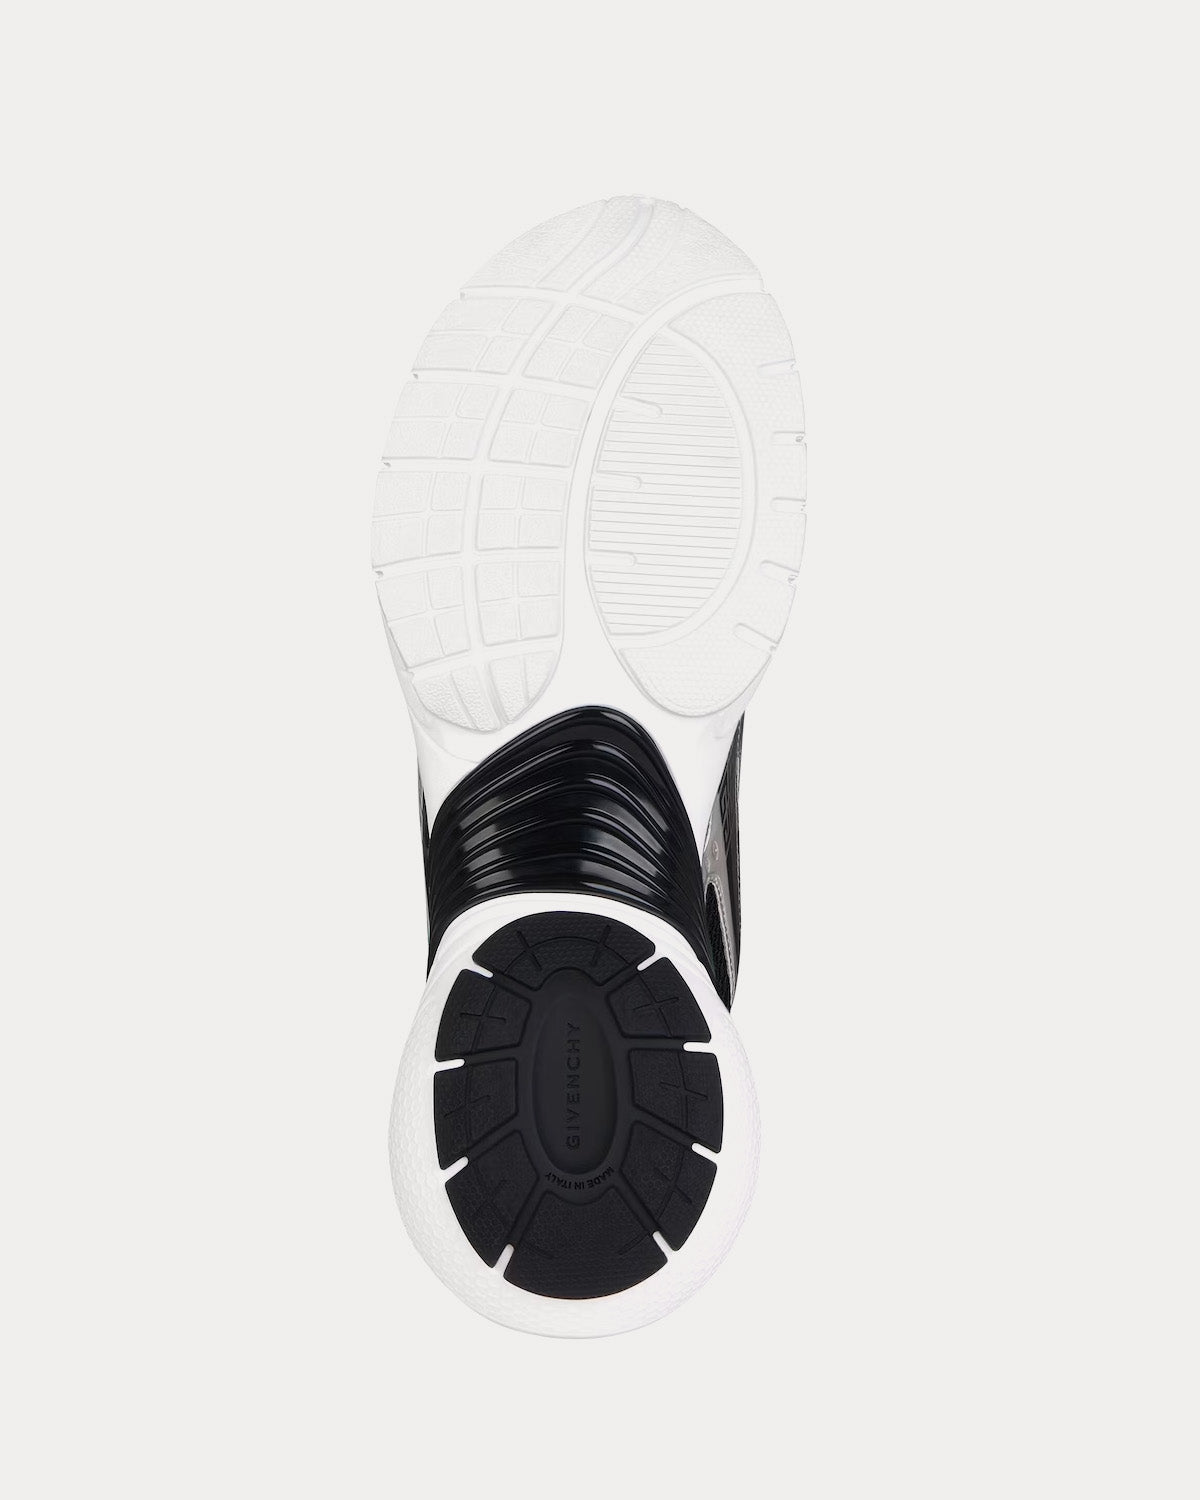 Givenchy - TK-MX Runner Mesh & Synthetic Leather White / Black / Silvery Low Top Sneakers